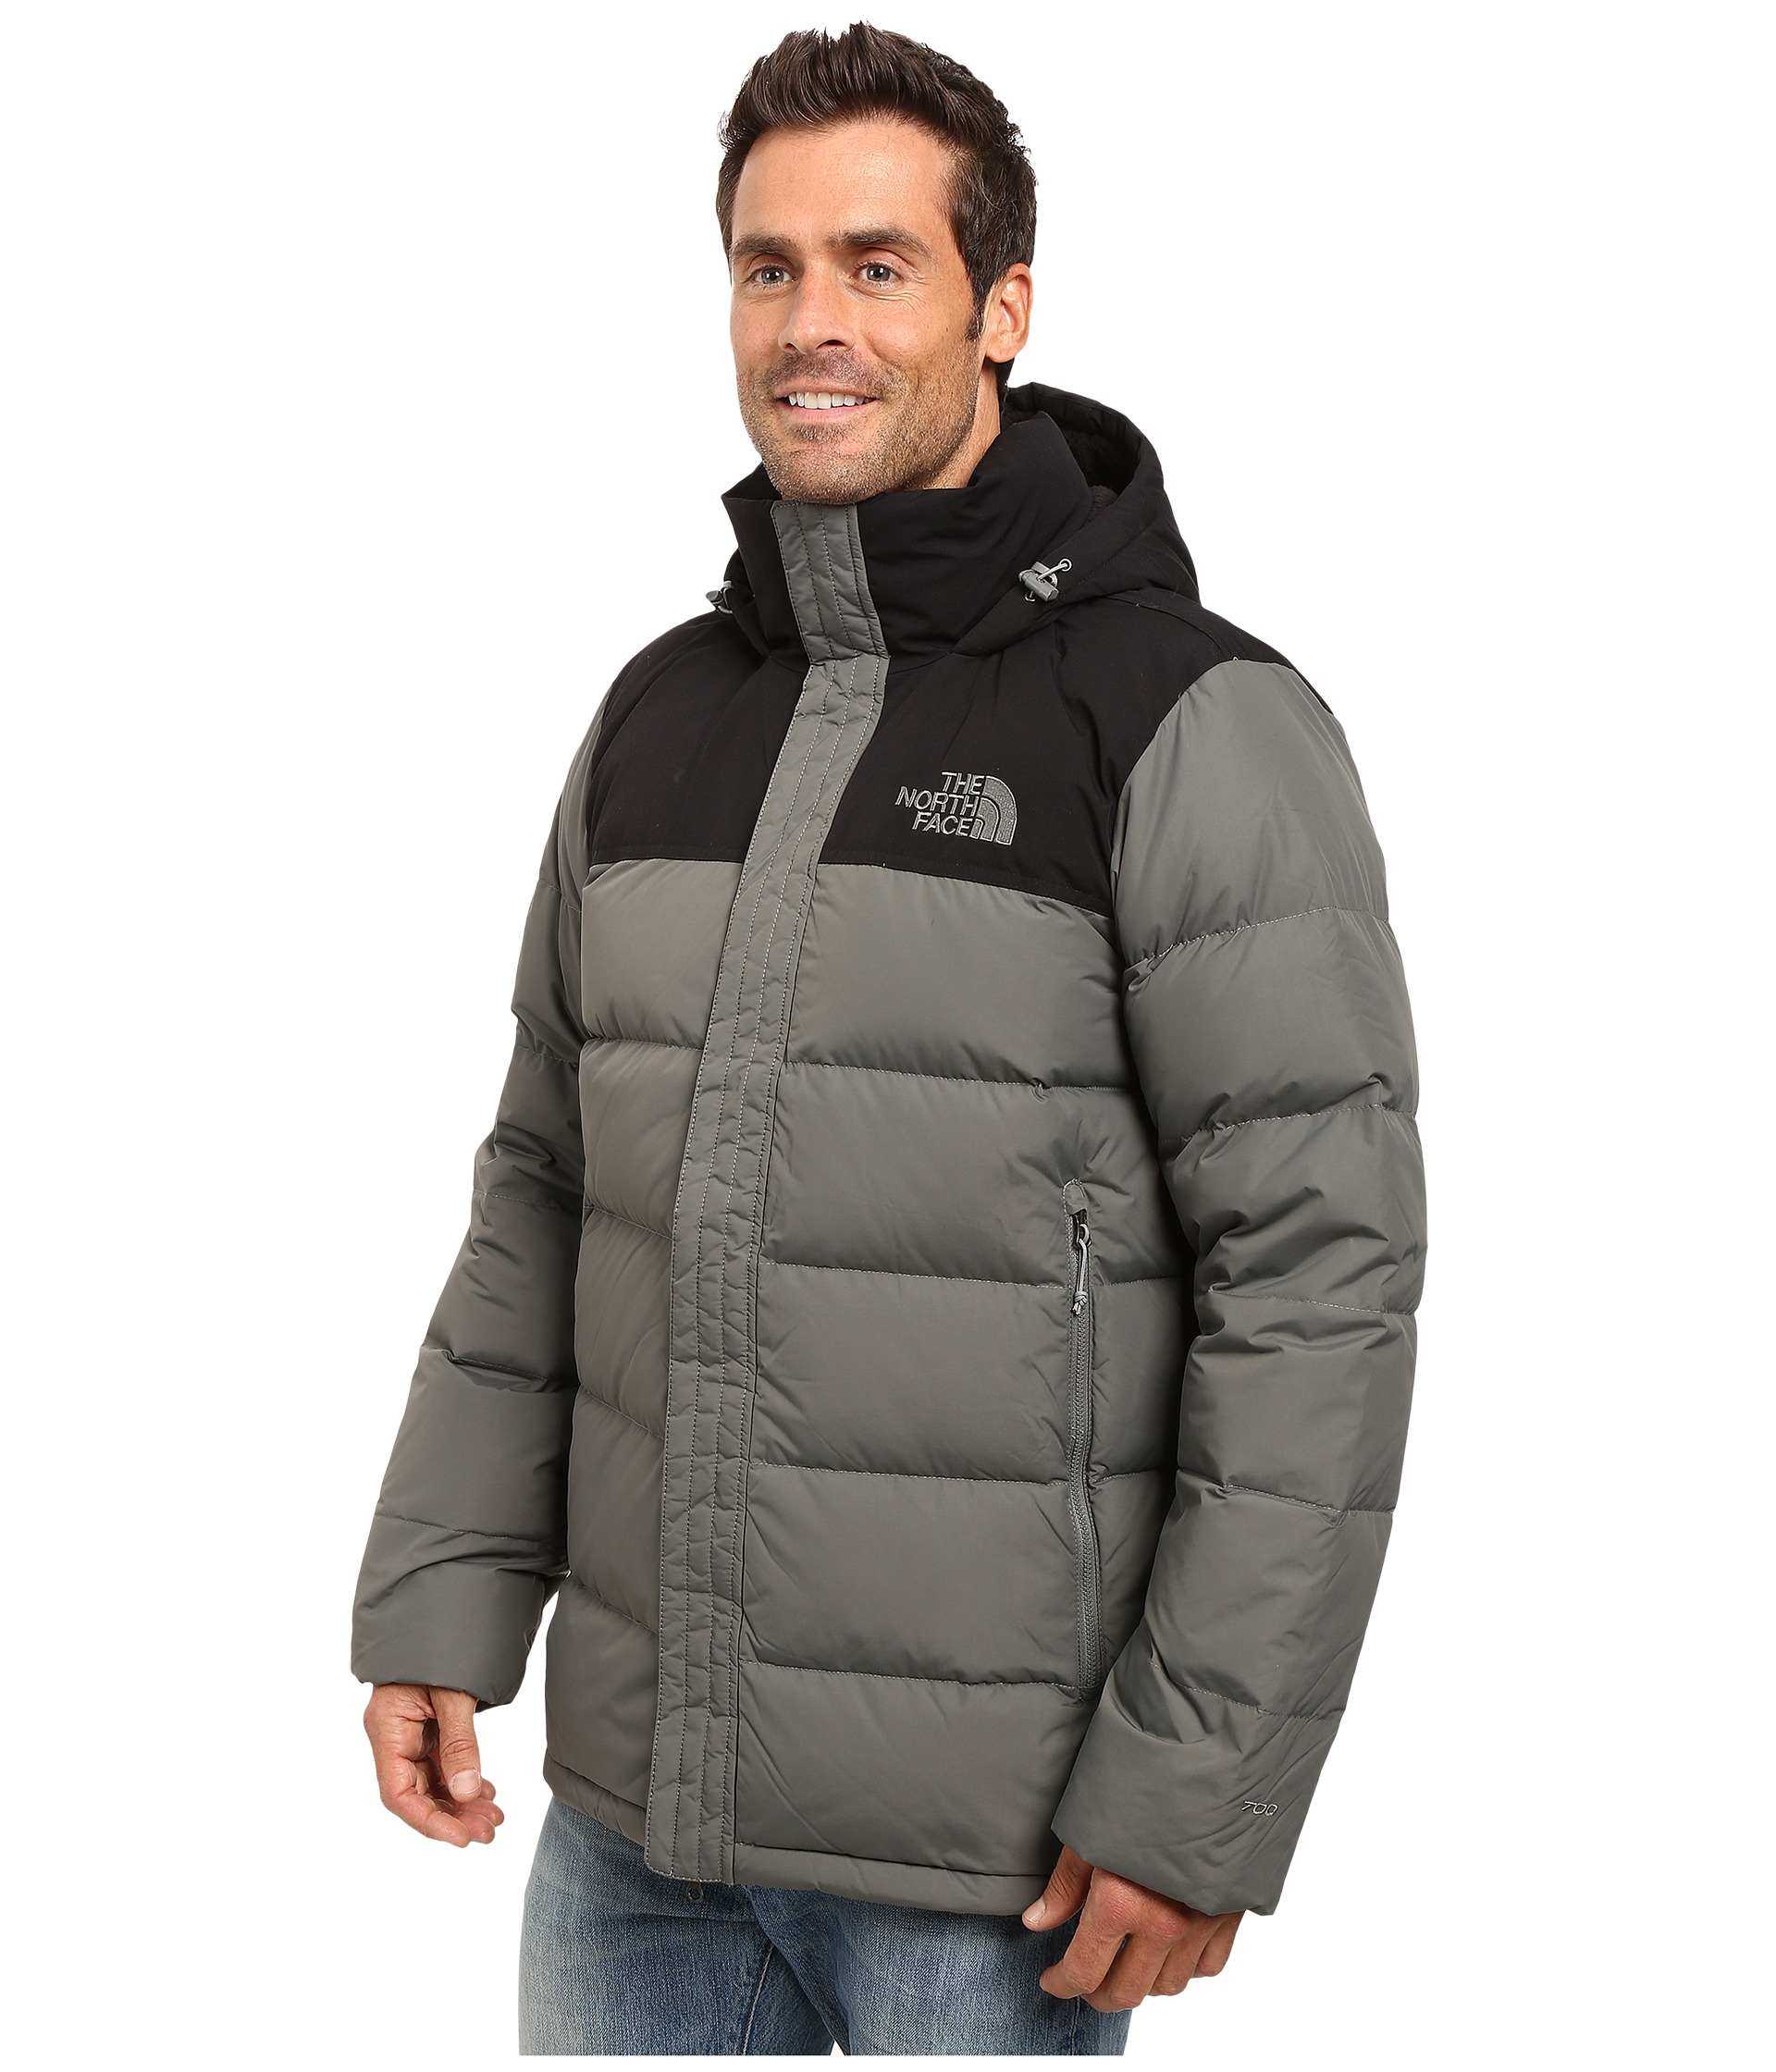 The North Face Goose Nuptse Ridge Parka in Gray for Men - Lyst